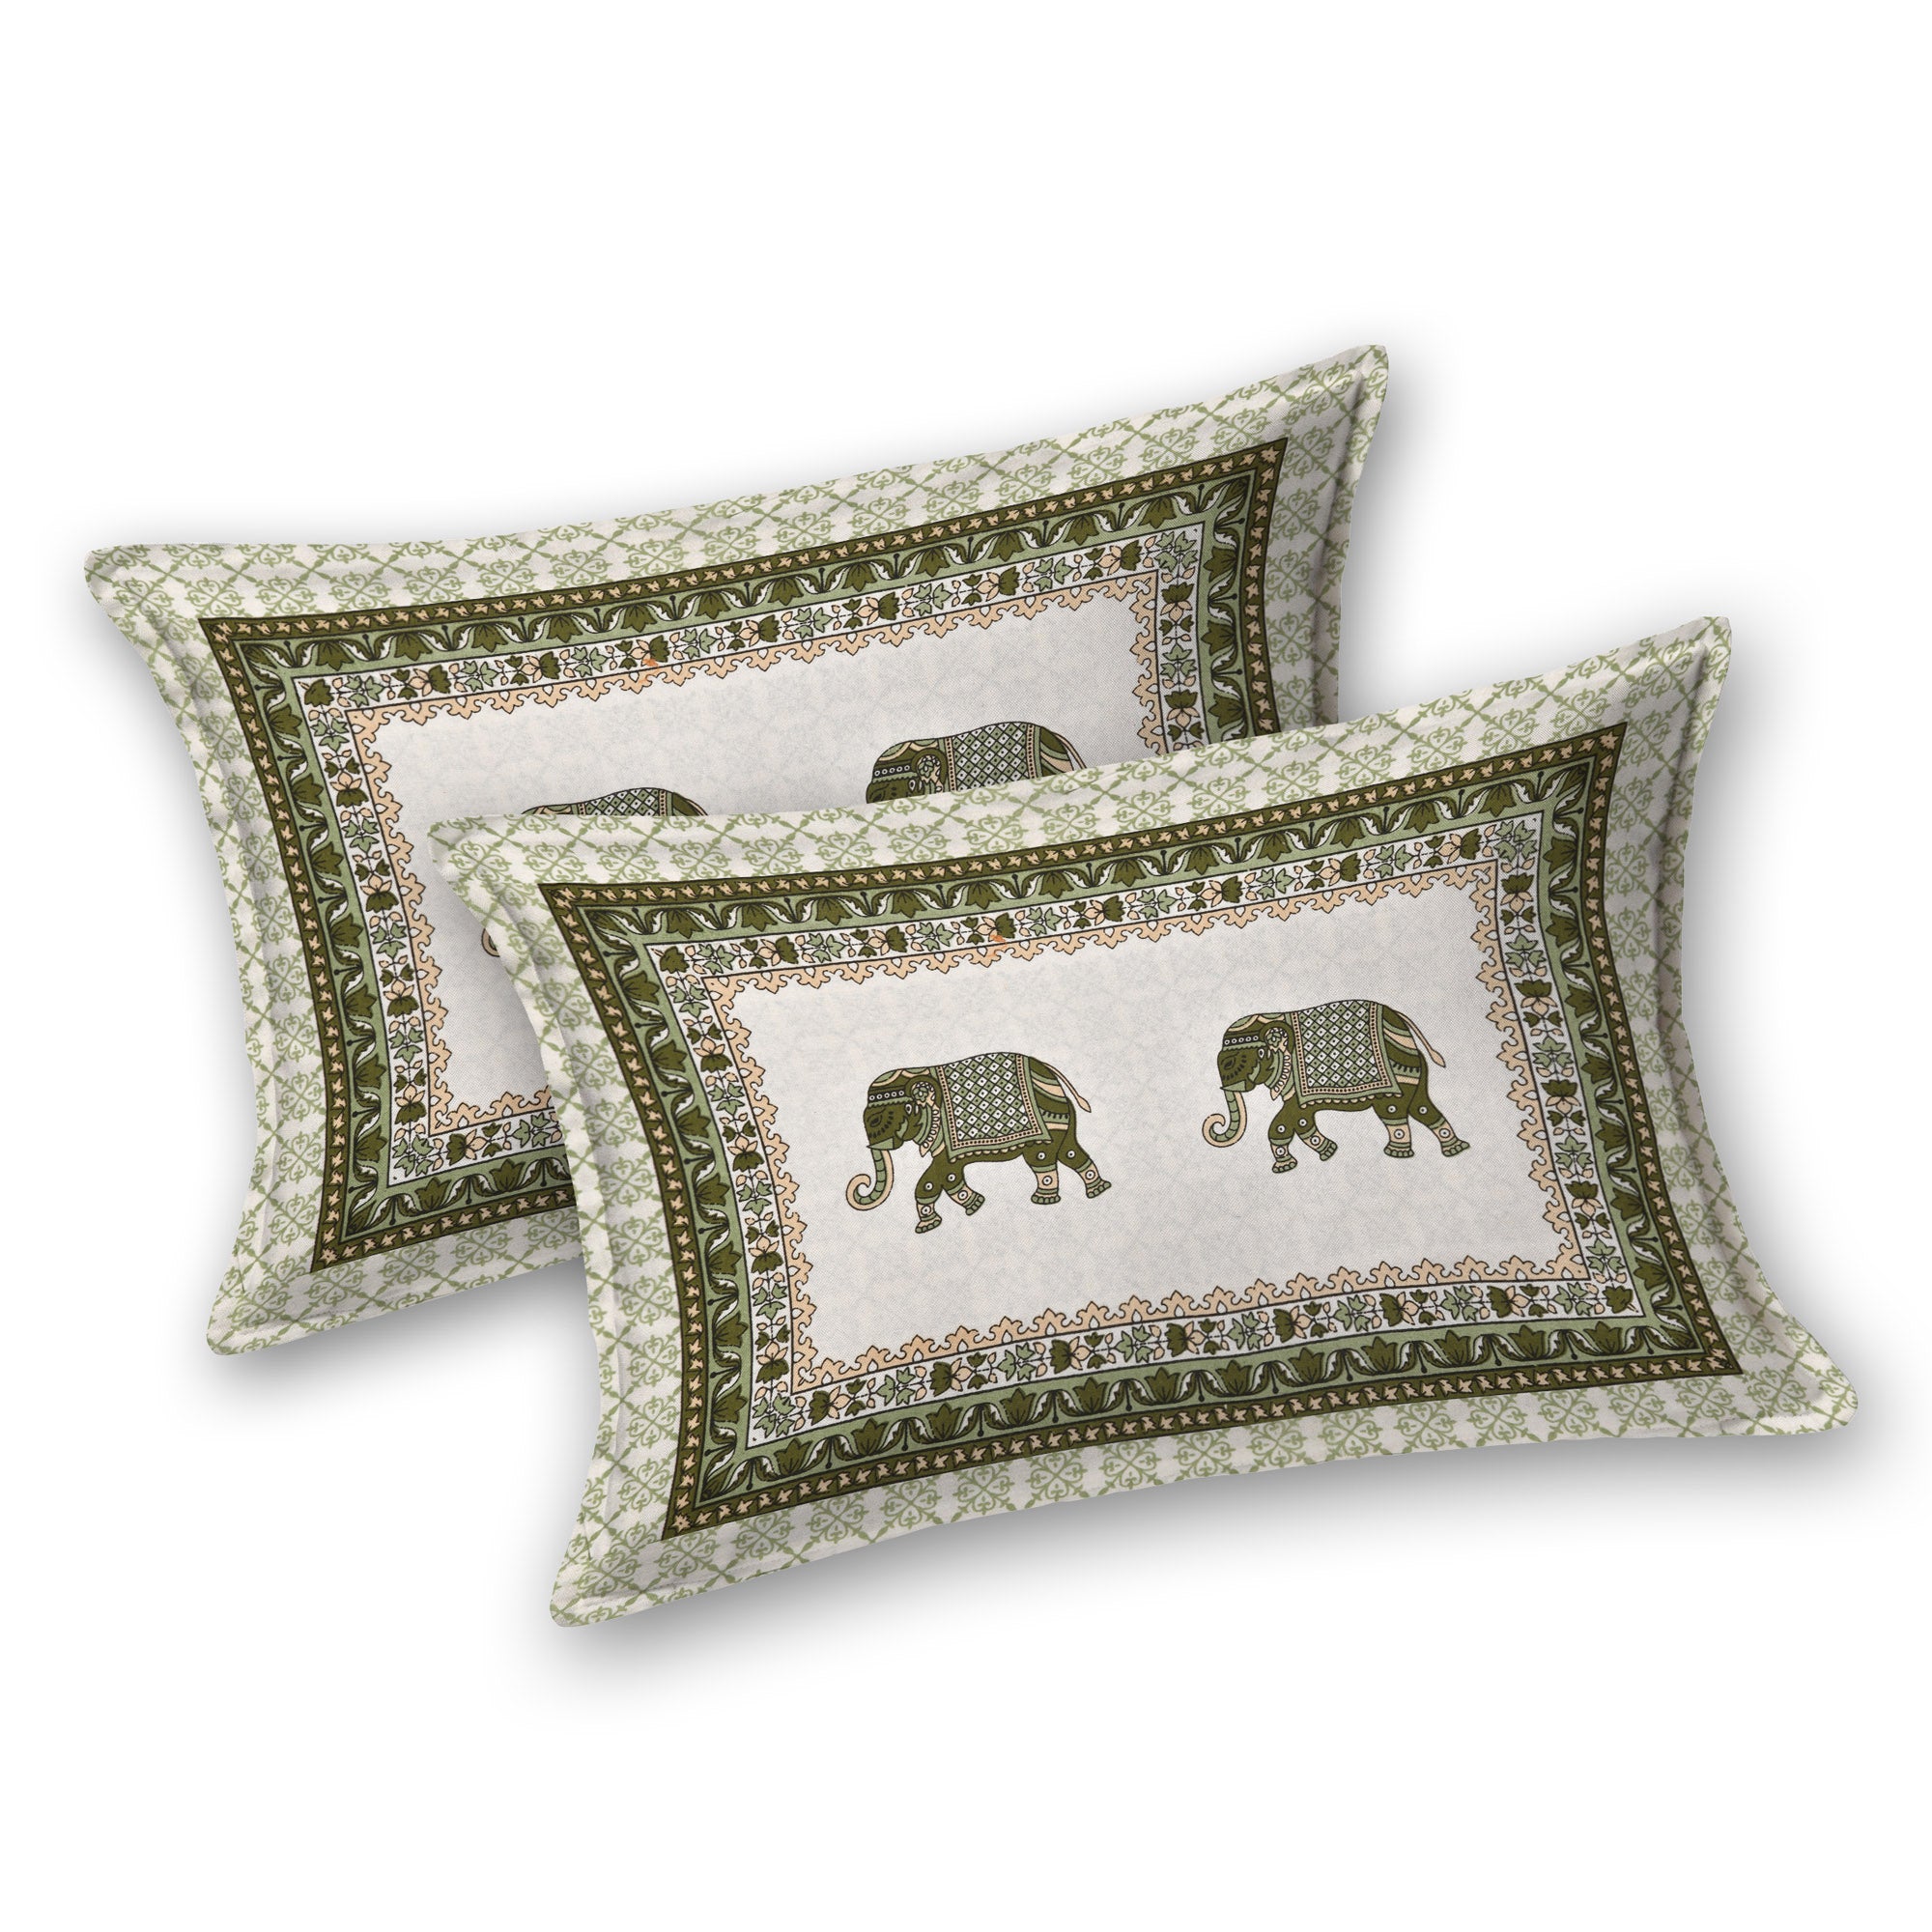 eCraftIndia Green Cotton Geometric Elephant Printed 180TC King Size Double Bedsheet with 2 Pillow Covers 3